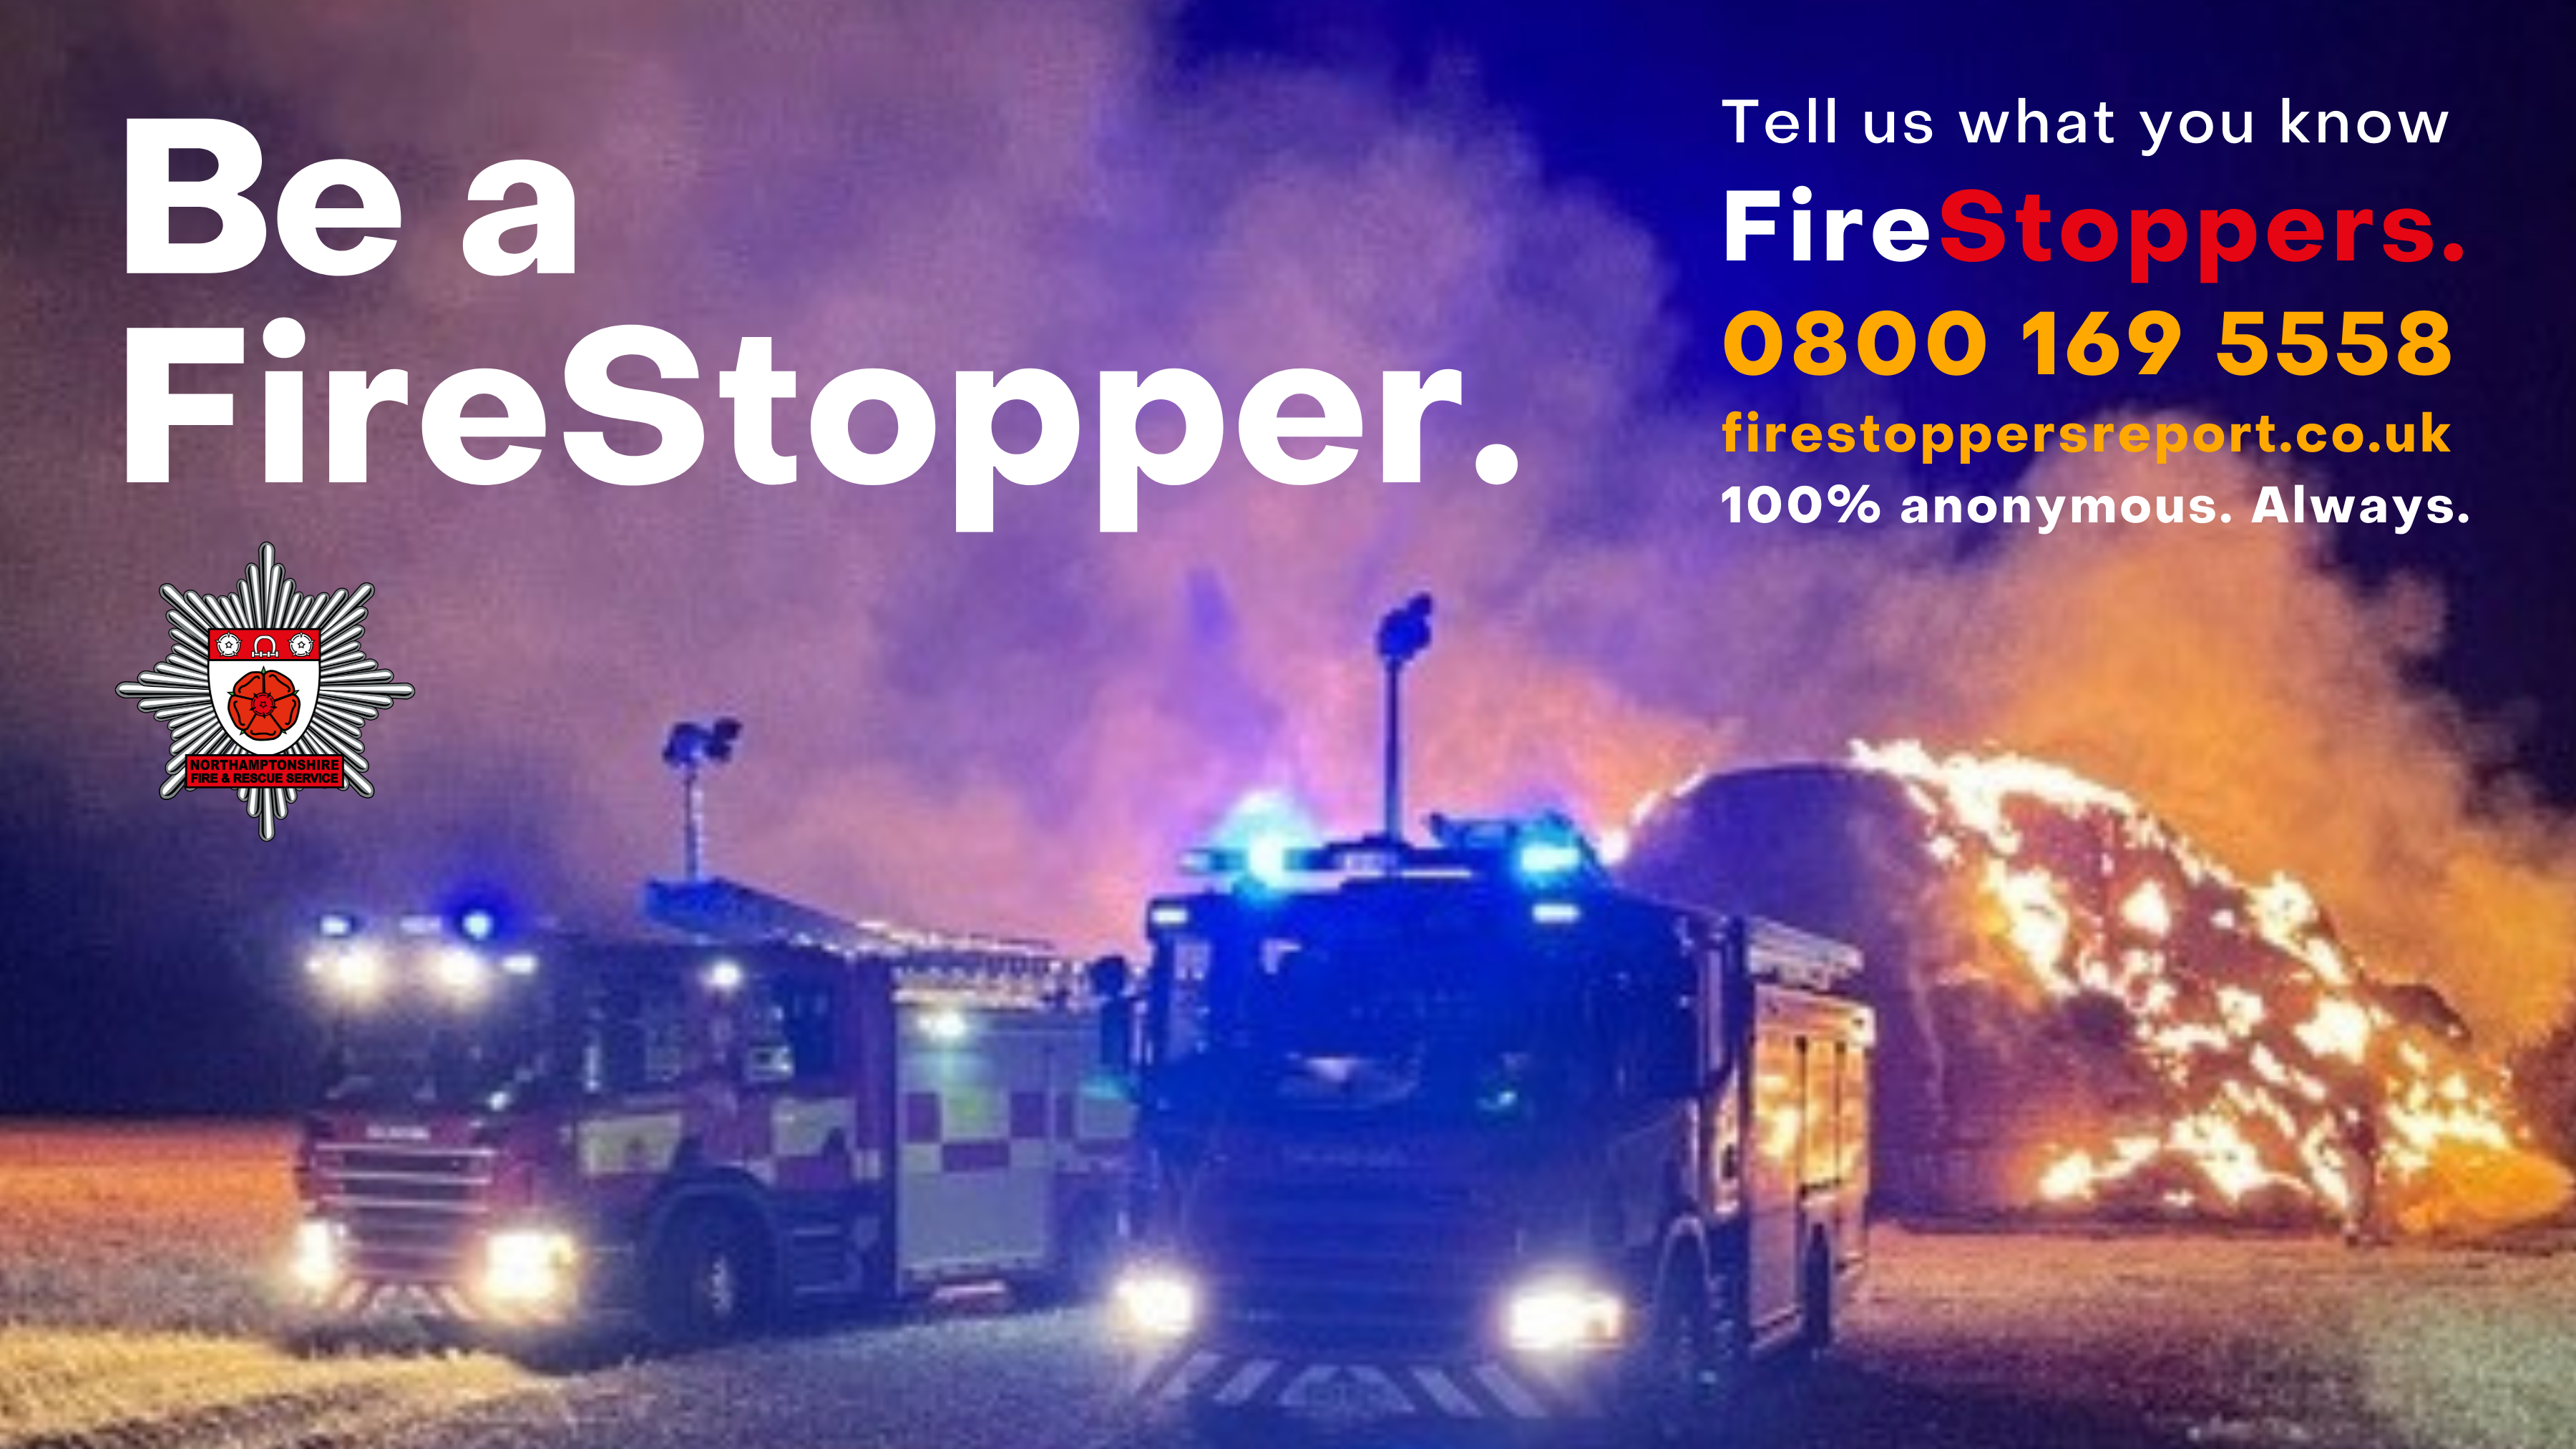 Joint plea to the public as deliberate fire setting increases in the county